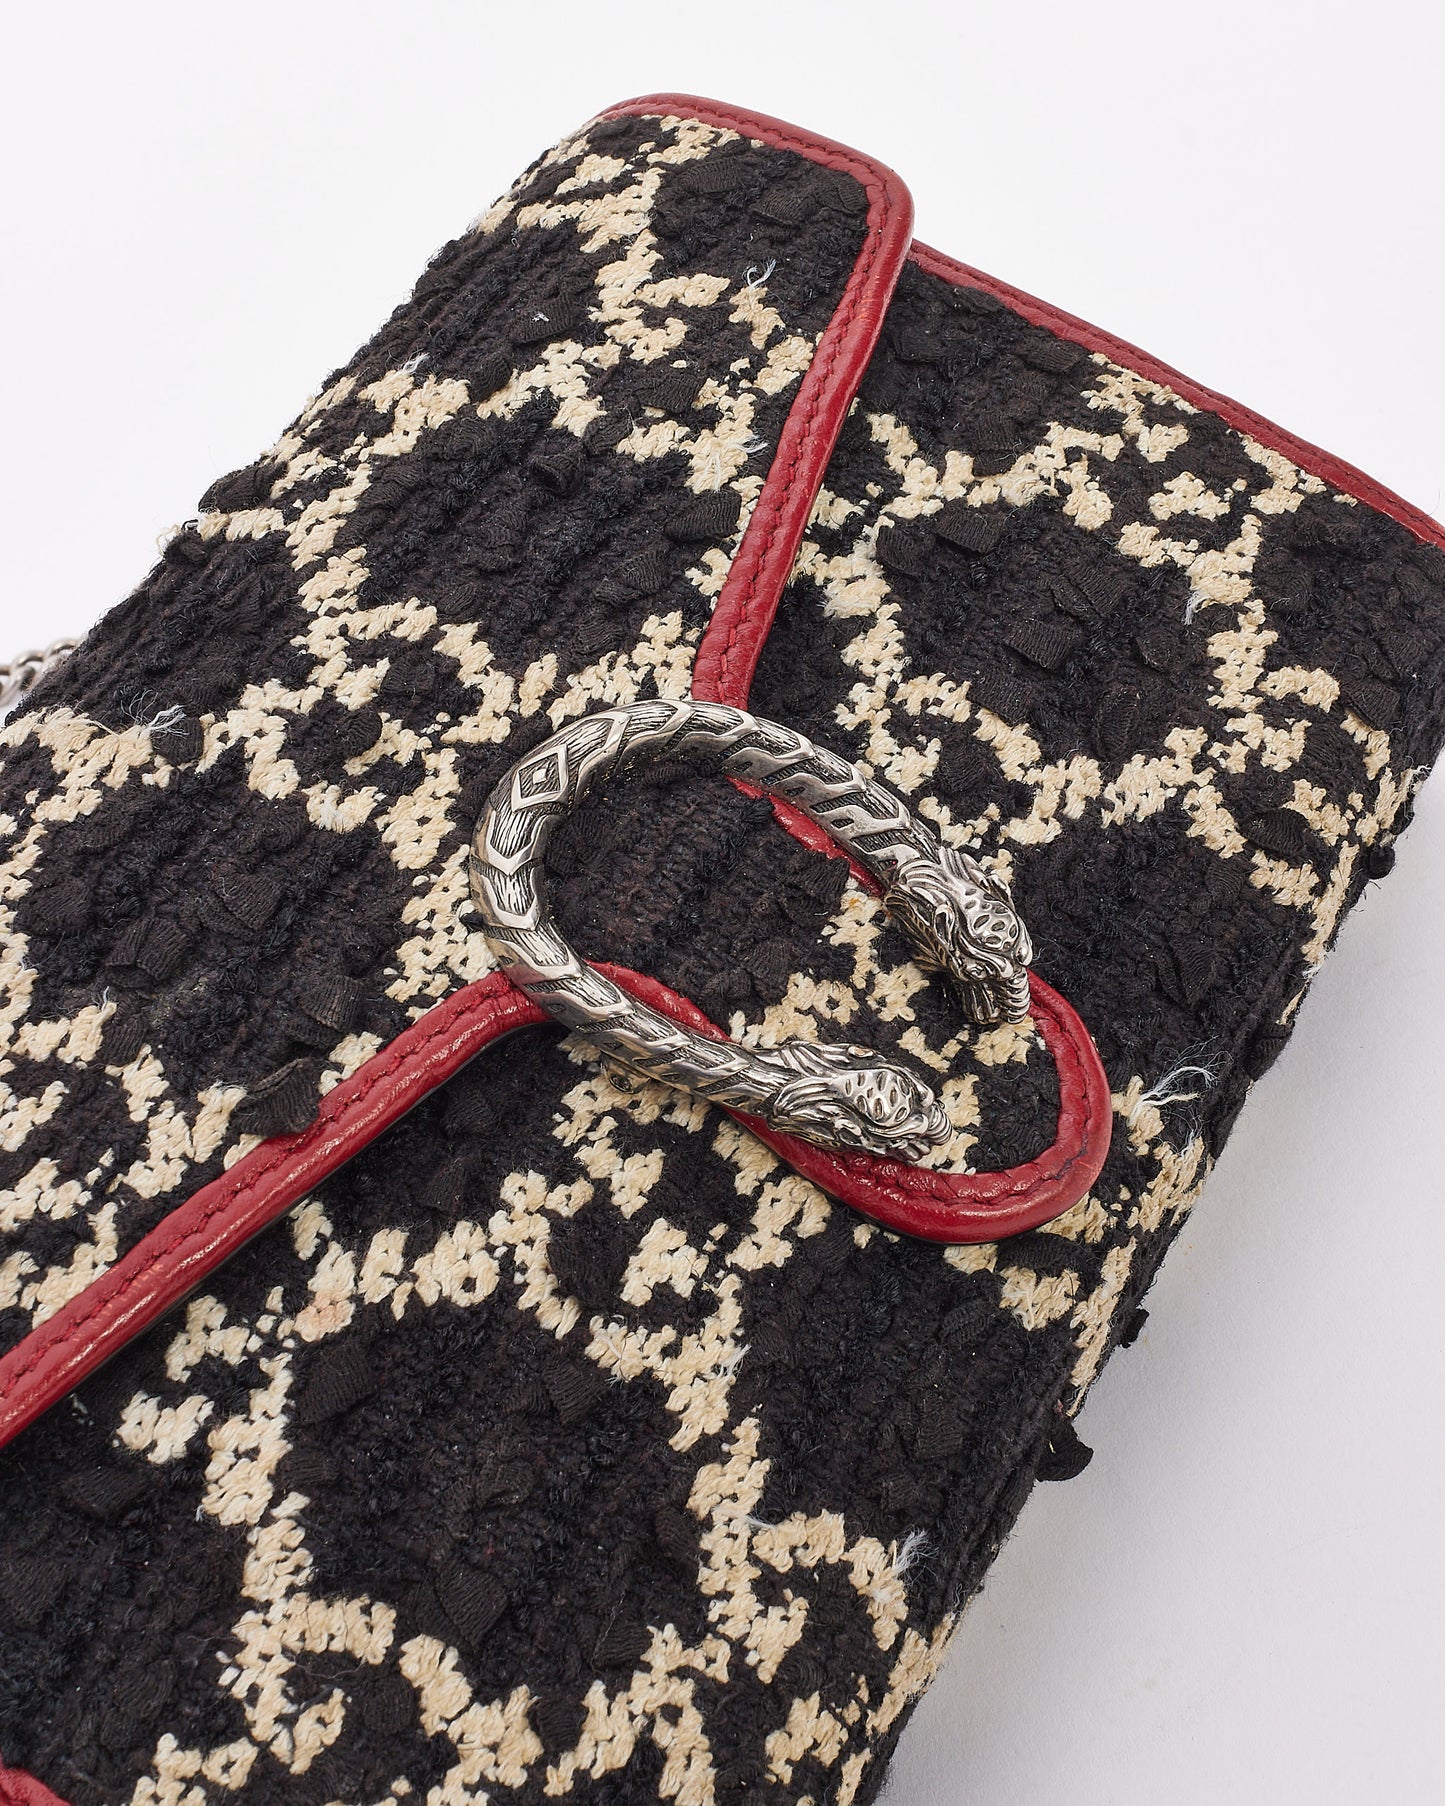 Gucci Black/Red Small GG Tweed Dionysus Chain Wallet